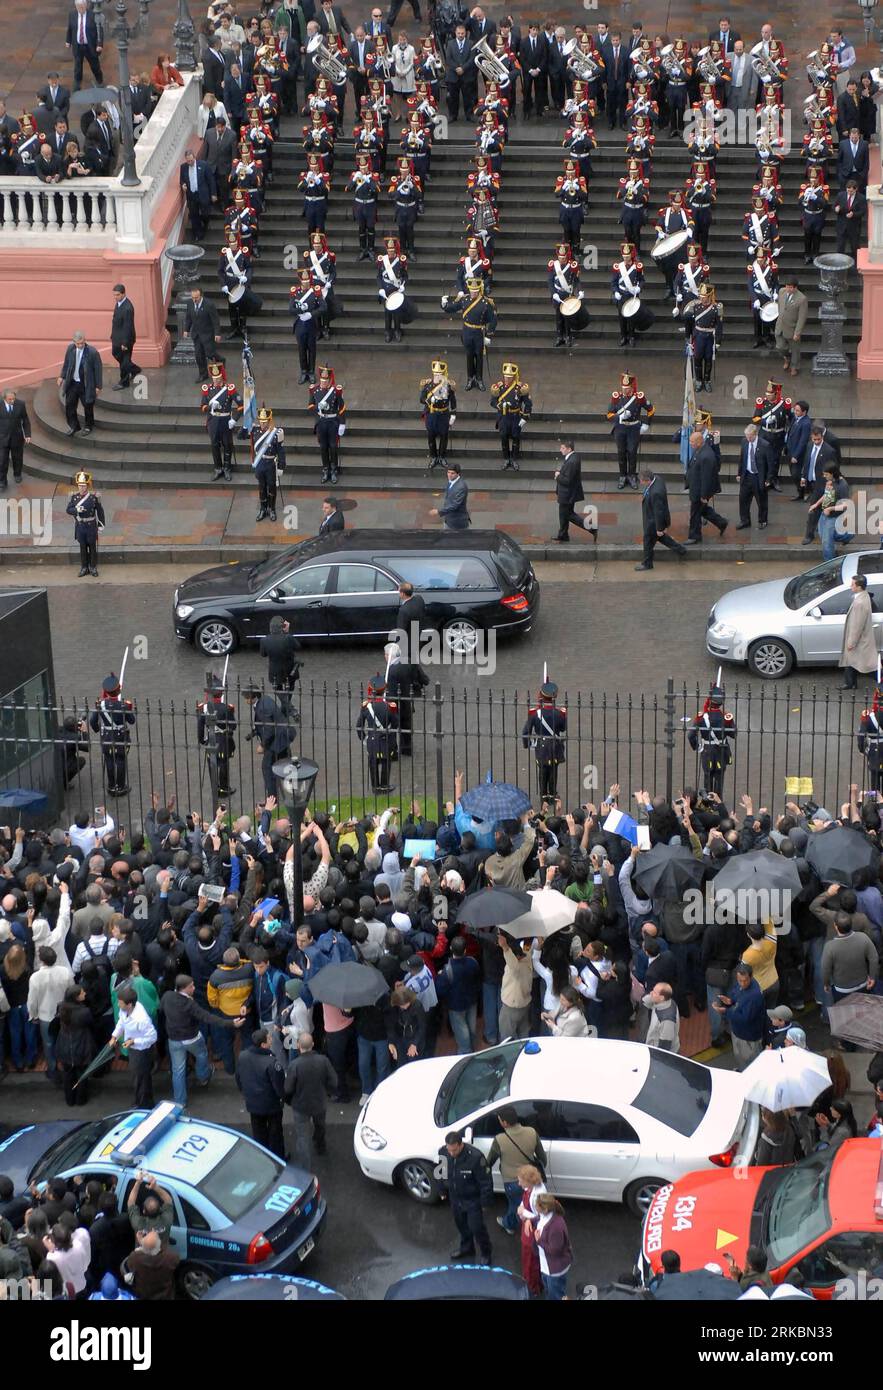 Bildnummer: 54585402  Datum: 29.10.2010  Copyright: imago/Xinhua (101029) --  BUENOS AIRES, Oct. 29, 2010 (Xinhua) -- pay respect to the hearse which carries the remains of former Argentine President Nestor Kirchner from the Casa Rosada Presidential Palace to a local airport for a flight to his home El Calafate, Province of Santa Cruz, where he will be buried in his family cemetery, Oct. 29, 2010. (Xinhua/Leonardo Zavattaro/Telam) ARGENTINA-BUENOS AIRES-KIRCHNER-FUNERAL PUBLICATIONxNOTxINxCHN People Politik Beerdigung Trauer Kirchner premiumd kbdig xcb 2010 hoch o0 Totale    Bildnummer 5458540 Stock Photo